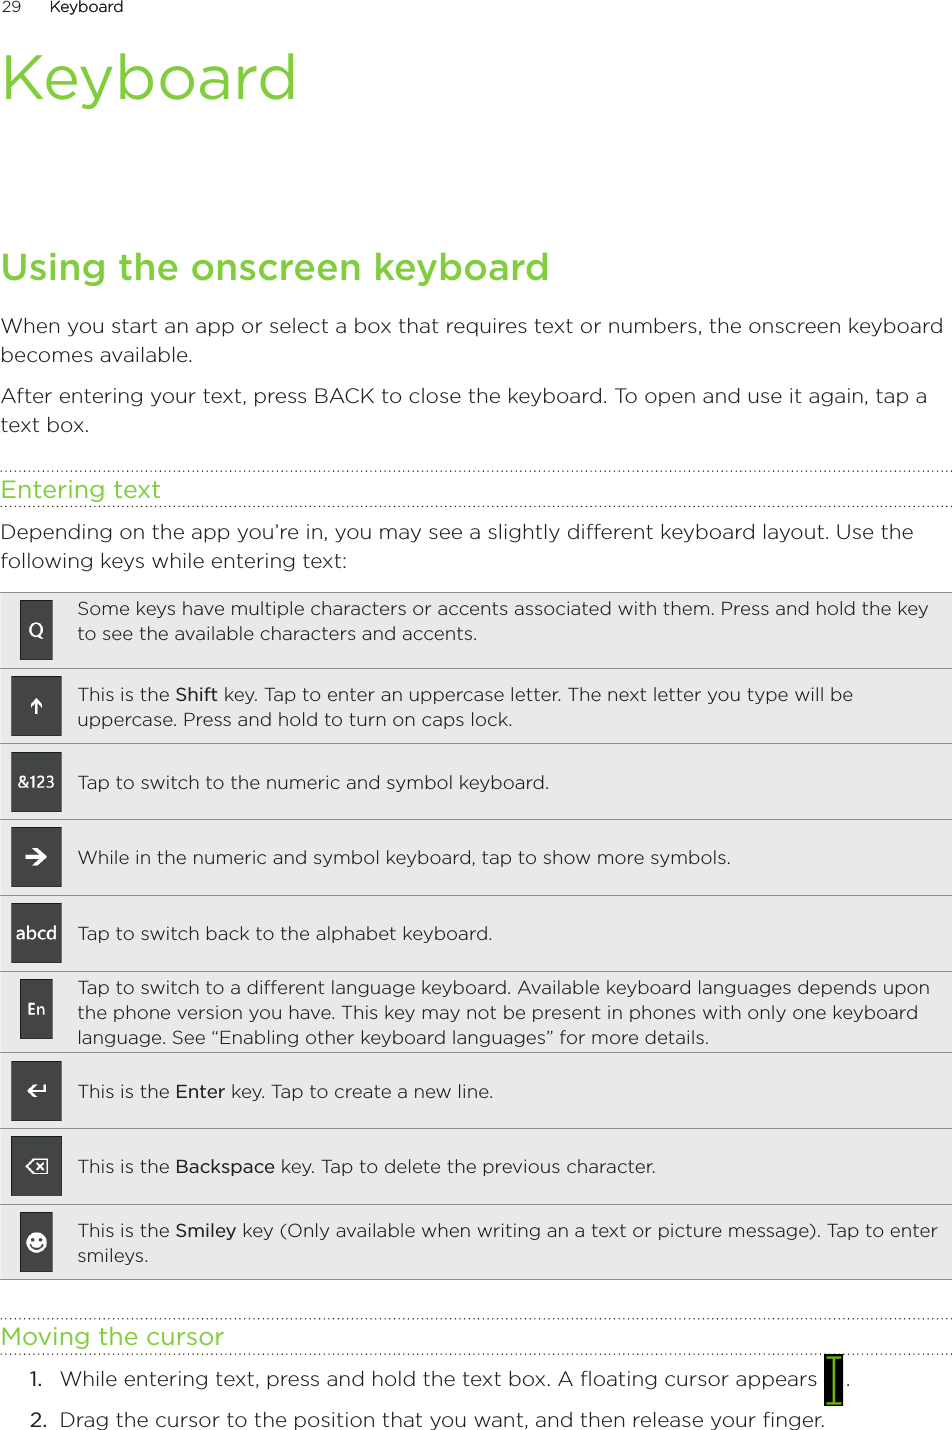 29      KeyboardKeyboard      KeyboardUsing the onscreen keyboardWhen you start an app or select a box that requires text or numbers, the onscreen keyboard becomes available.After entering your text, press BACK to close the keyboard. To open and use it again, tap a text box.Entering textDepending on the app you’re in, you may see a slightly different keyboard layout. Use the following keys while entering text:Some keys have multiple characters or accents associated with them. Press and hold the key to see the available characters and accents.This is the Shift key. Tap to enter an uppercase letter. The next letter you type will be uppercase. Press and hold to turn on caps lock. Tap to switch to the numeric and symbol keyboard.While in the numeric and symbol keyboard, tap to show more symbols.Tap to switch back to the alphabet keyboard.Tap to switch to a different language keyboard. Available keyboard languages depends upon the phone version you have. This key may not be present in phones with only one keyboard language. See “Enabling other keyboard languages” for more details.This is the Enter key. Tap to create a new line.This is the Backspace key. Tap to delete the previous character.This is the Smiley key (Only available when writing an a text or picture message). Tap to enter smileys.Moving the cursorWhile entering text, press and hold the text box. A floating cursor appears   .Drag the cursor to the position that you want, and then release your finger. 1.2.